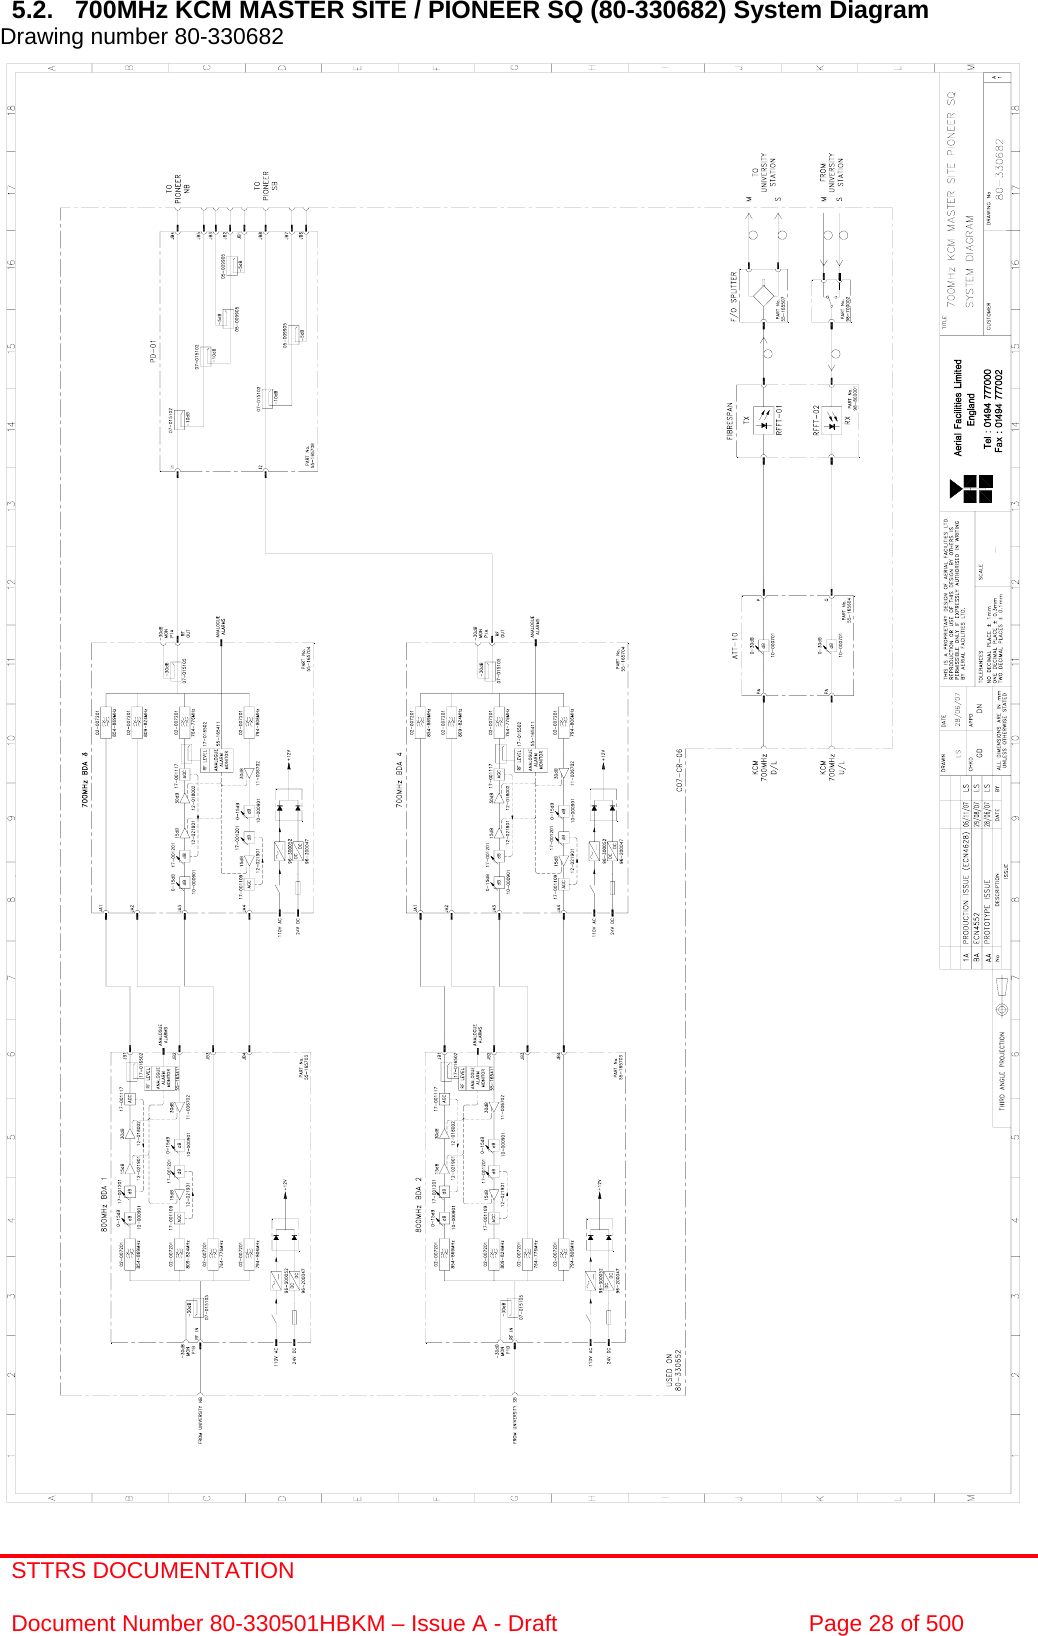 STTRS DOCUMENTATION  Document Number 80-330501HBKM – Issue A - Draft  Page 28 of 500   5.2.  700MHz KCM MASTER SITE / PIONEER SQ (80-330682) System Diagram Drawing number 80-330682                                                       